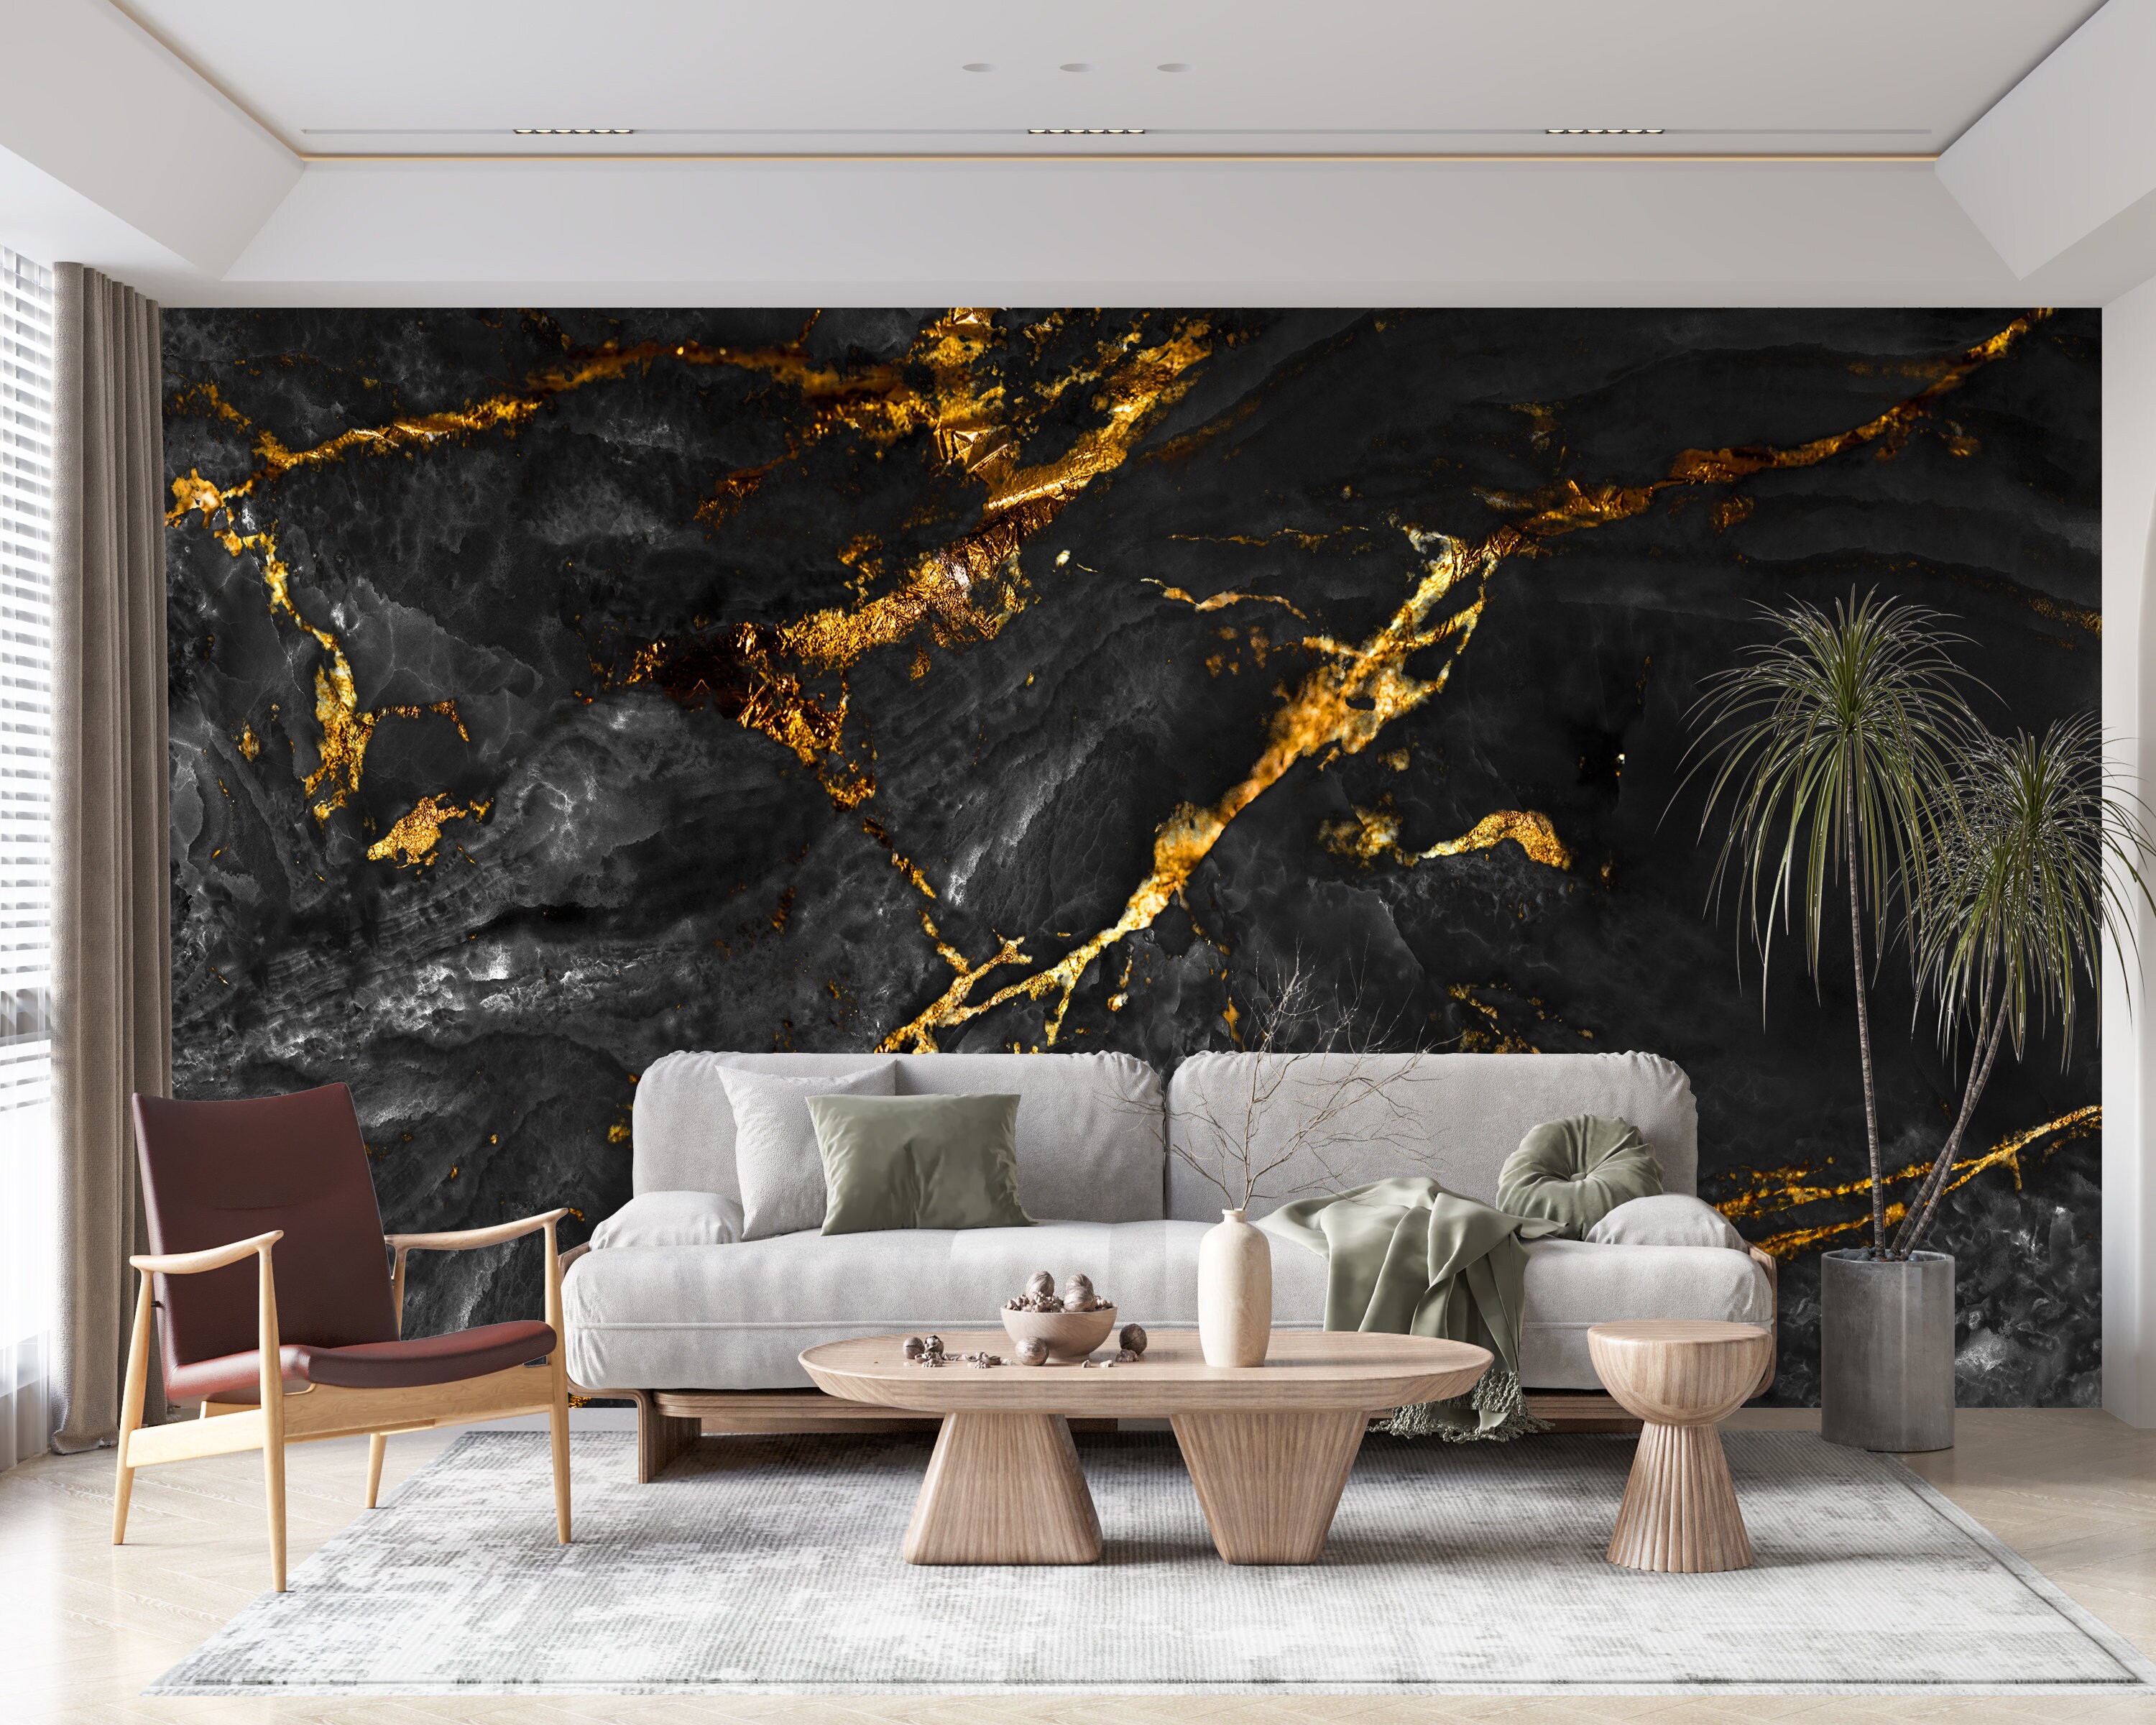 3.12x2.19m Wall mural wallpaper black and gold marble bedroom decoration